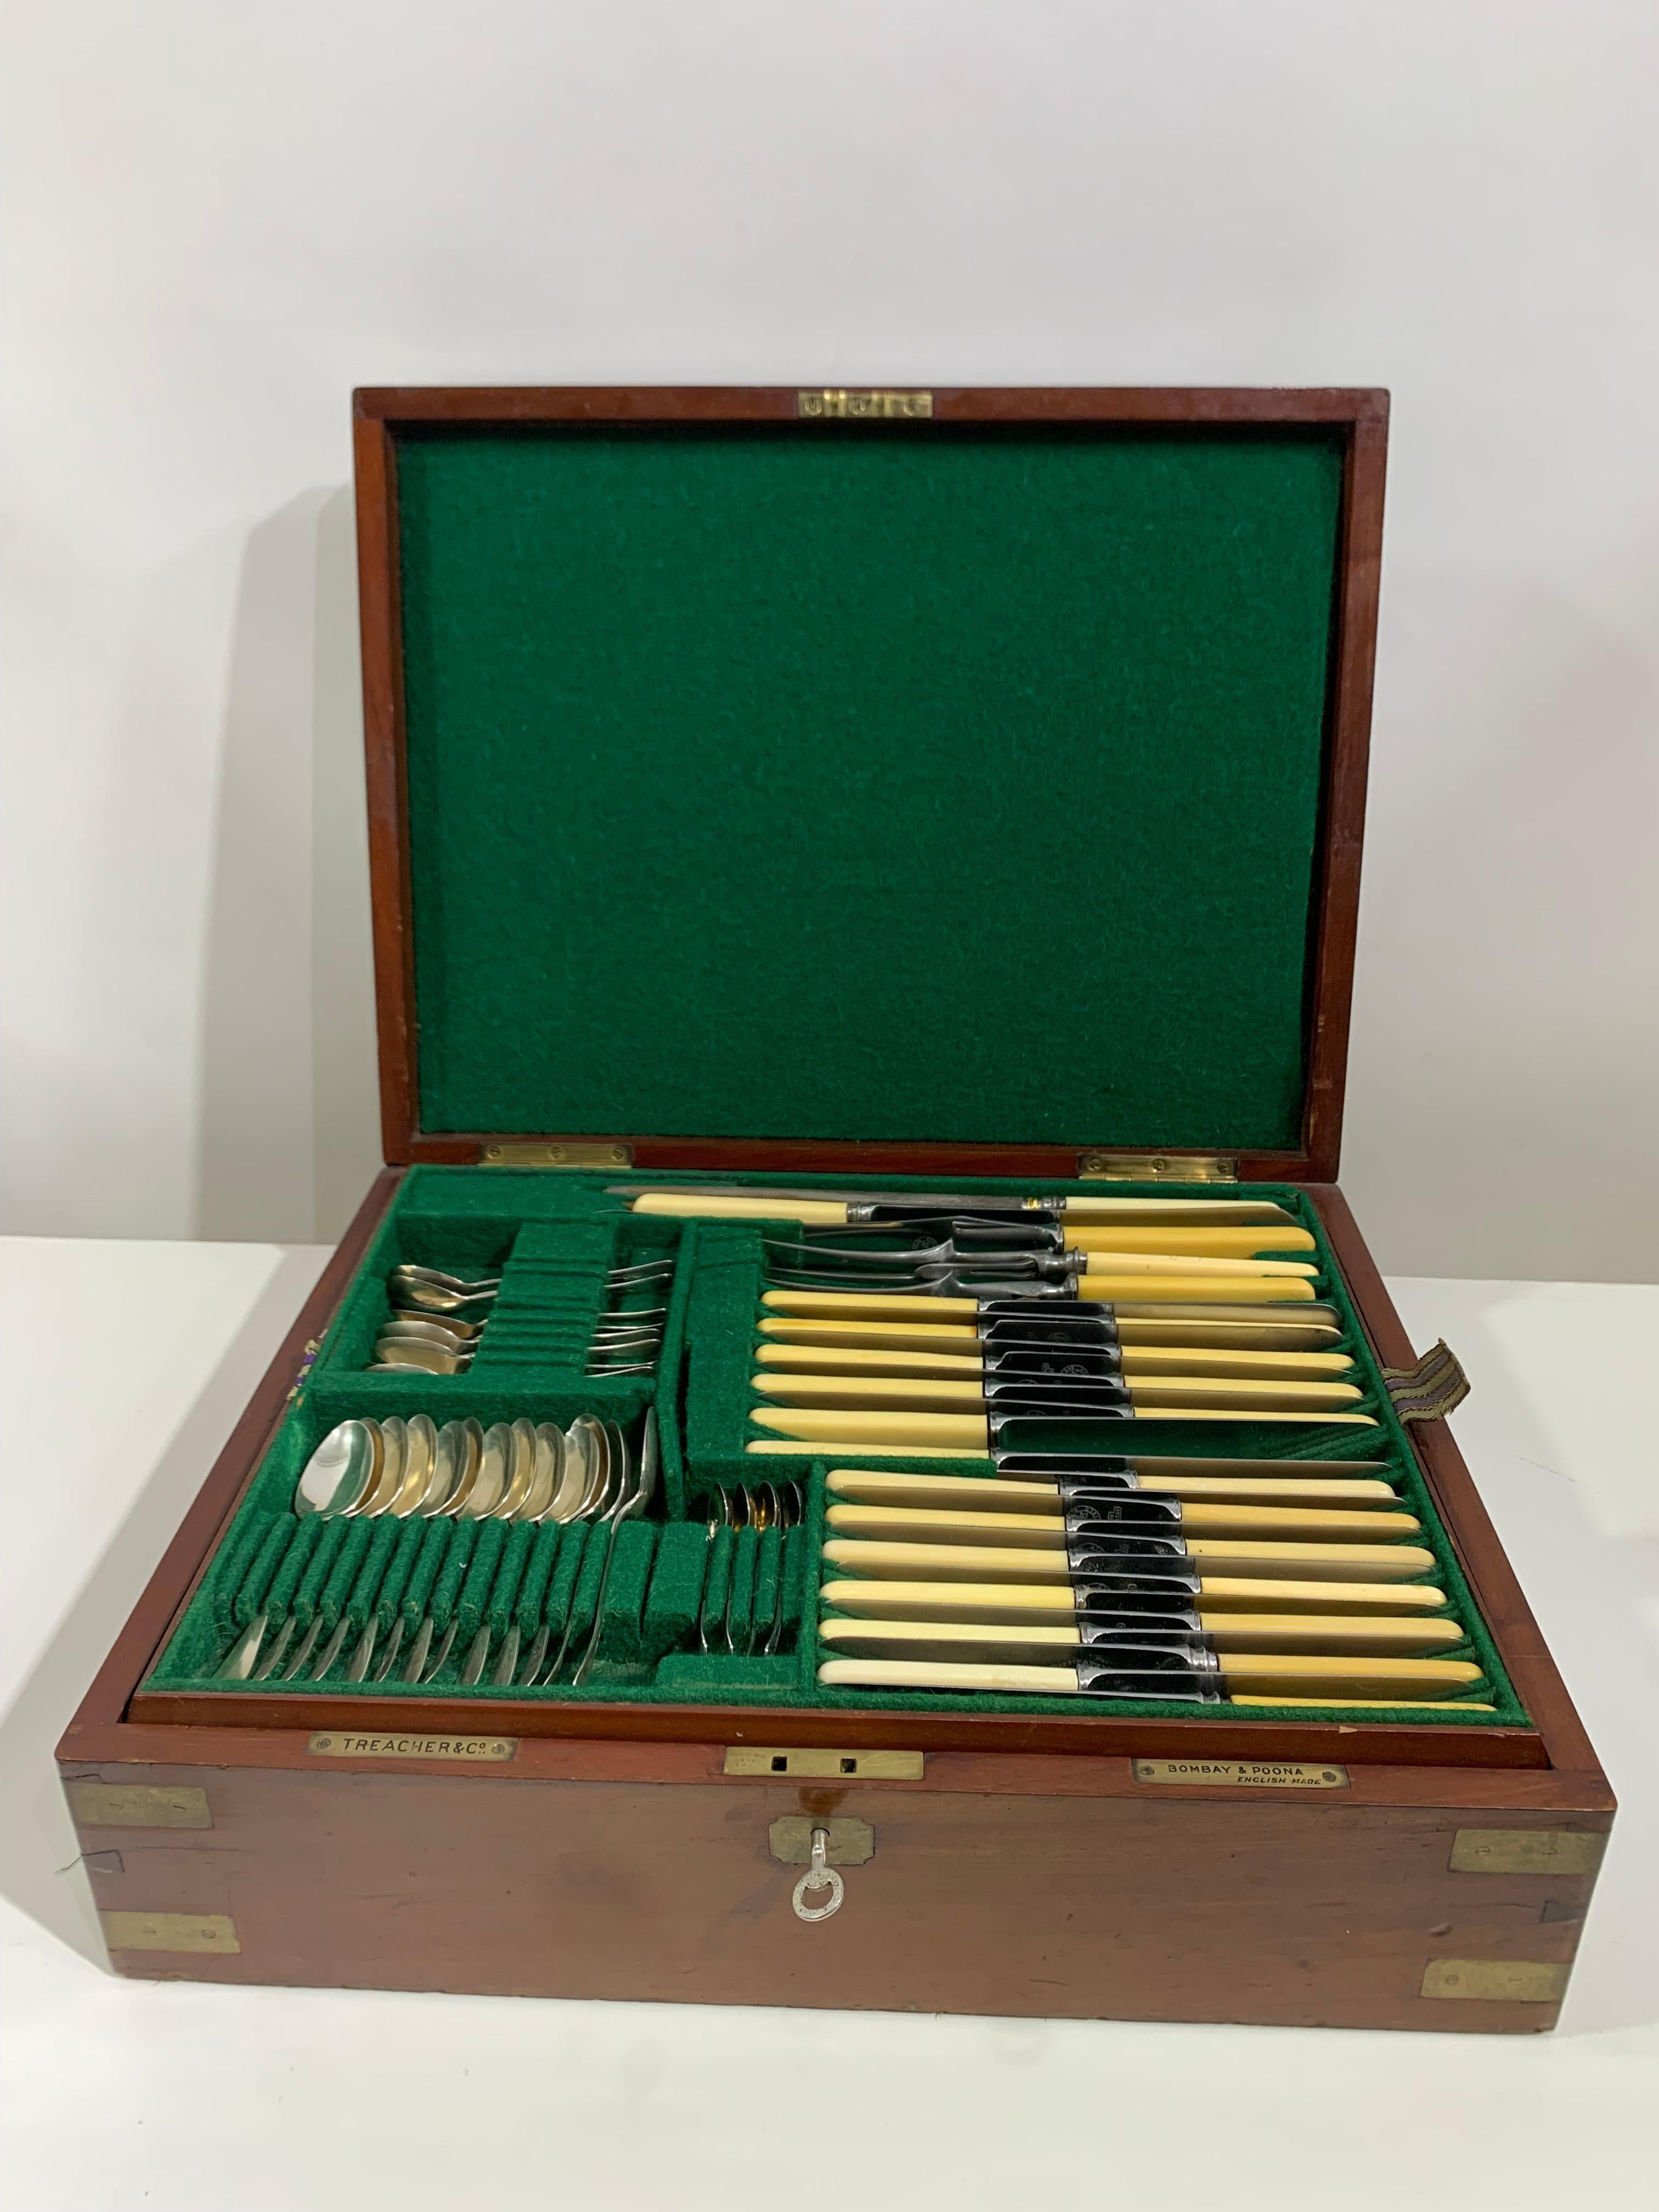 Vintage set of cutlery holding 96 pieces. The items are silver plated , some handles are engraved and some handles have parts cut and carved from animal bone. They are presented in this gorgeous wooden service box which is in a good presentable